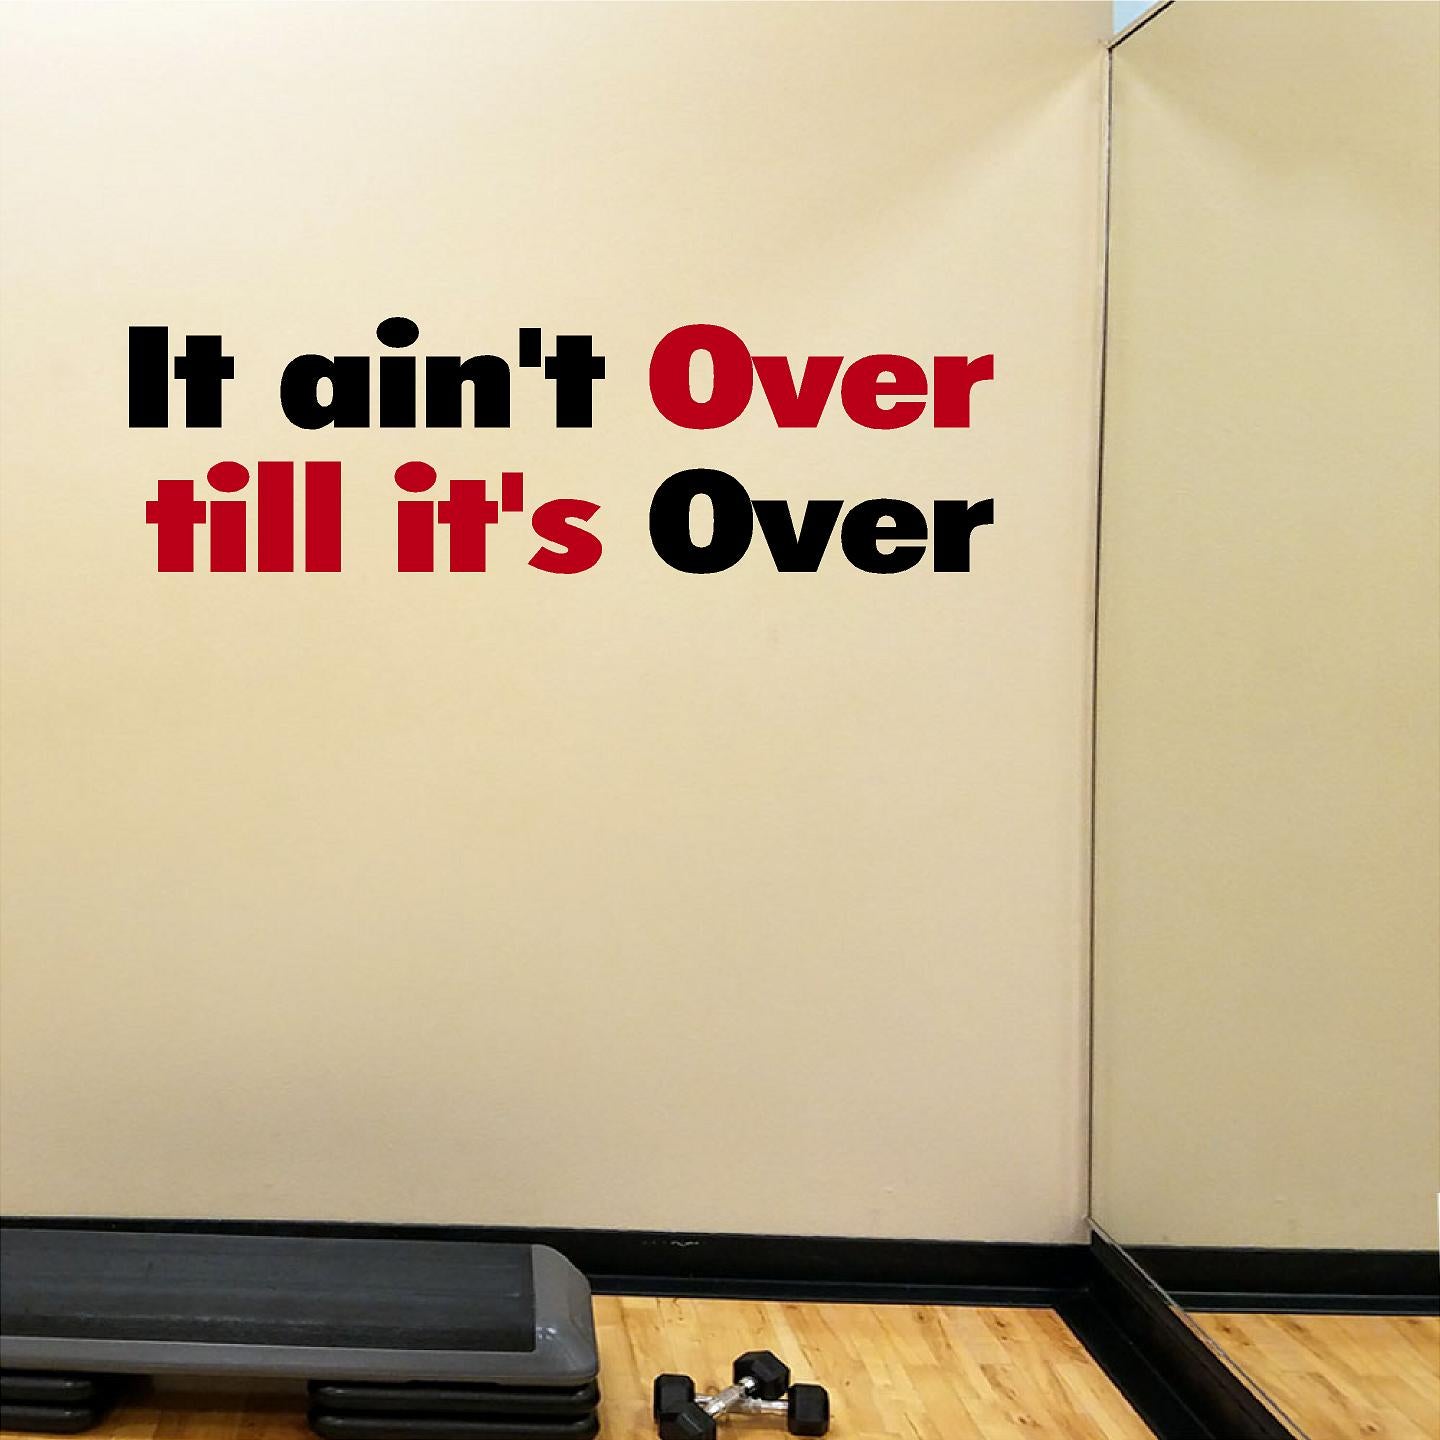 Stickers. Vinyl Wall Decal. Inspirational Quotes: It ain't Over till it's Over. Fitness. Sports. Office. Room Decor.